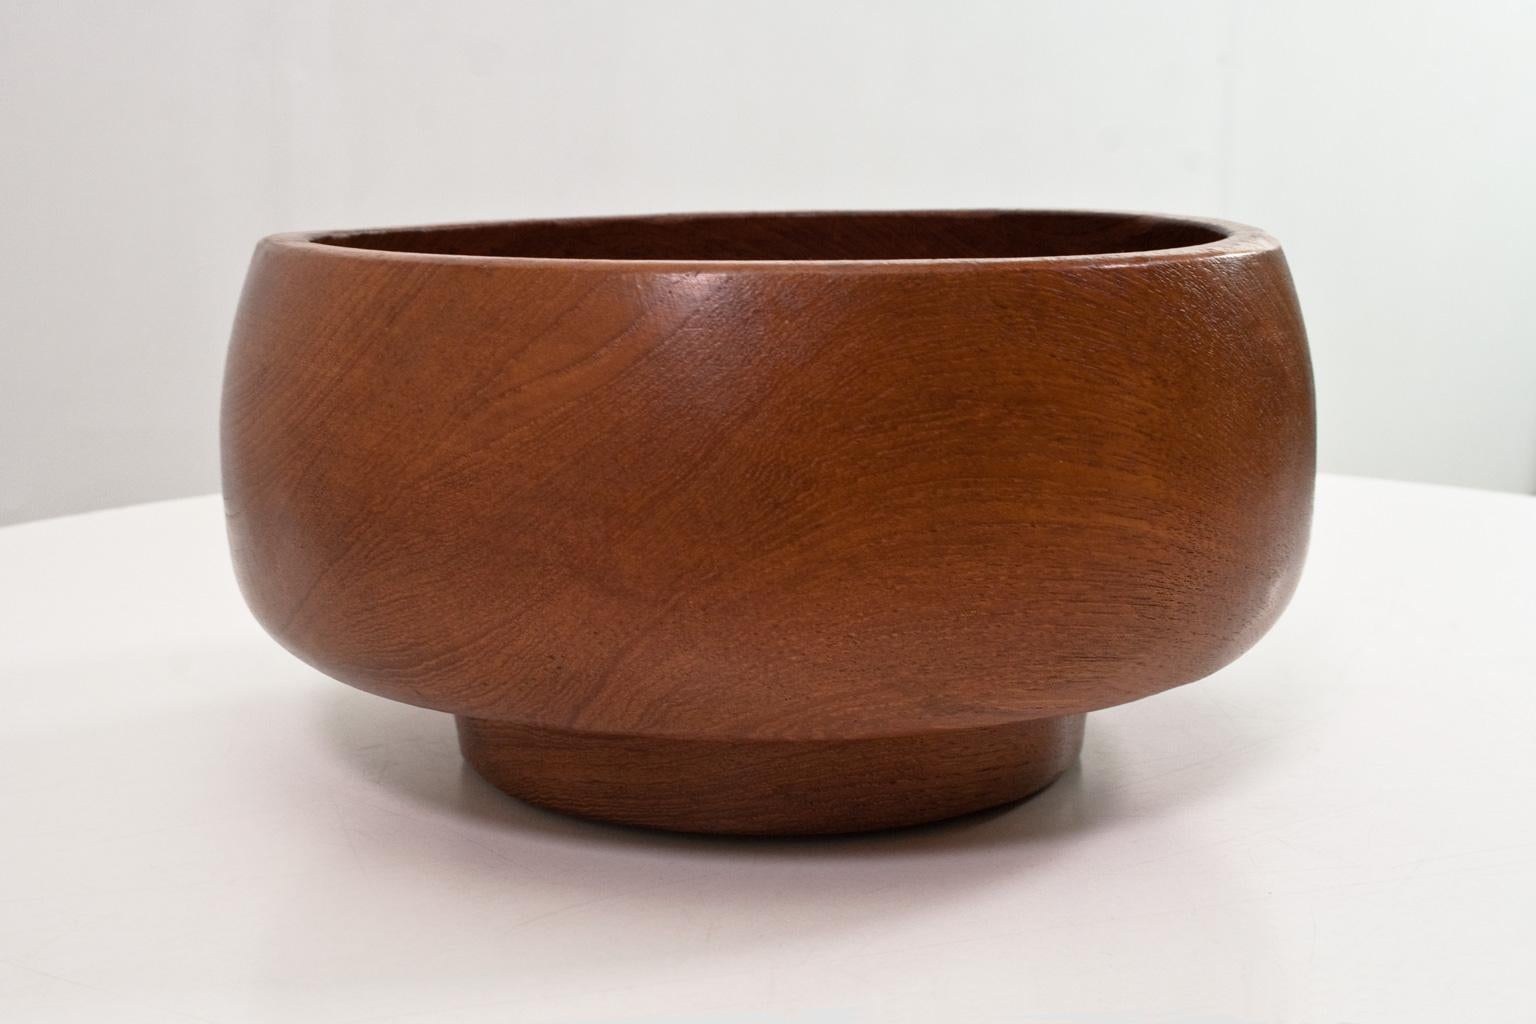 Large and heavy Danish modern decorative sculptural and handmade teak bowl. A wooden bowl on foot, made out of solid teak. Large size 25cm / 9.8 inch. Mid century table piece in excellent condition made of 12 mm thick teak wood, originated in